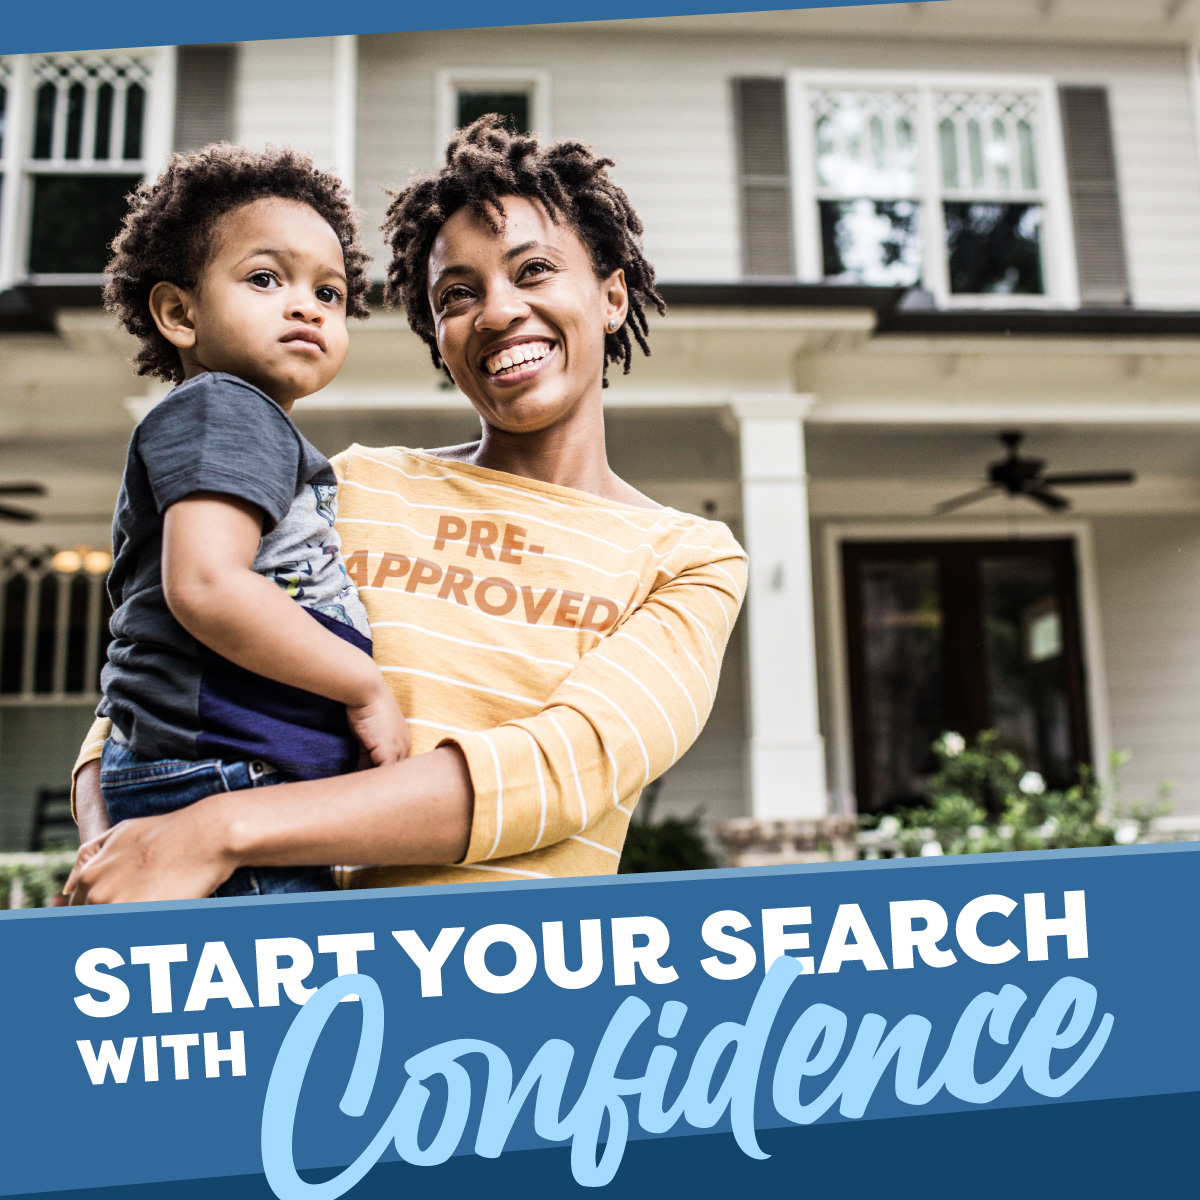 Many first-time homebuyers start house hunting before getting a mortgage pre-approval. This can lead to disappointment if they fall in love with a house only to find out they can't afford it. Call me today to get started! #firsttimehomebuyer